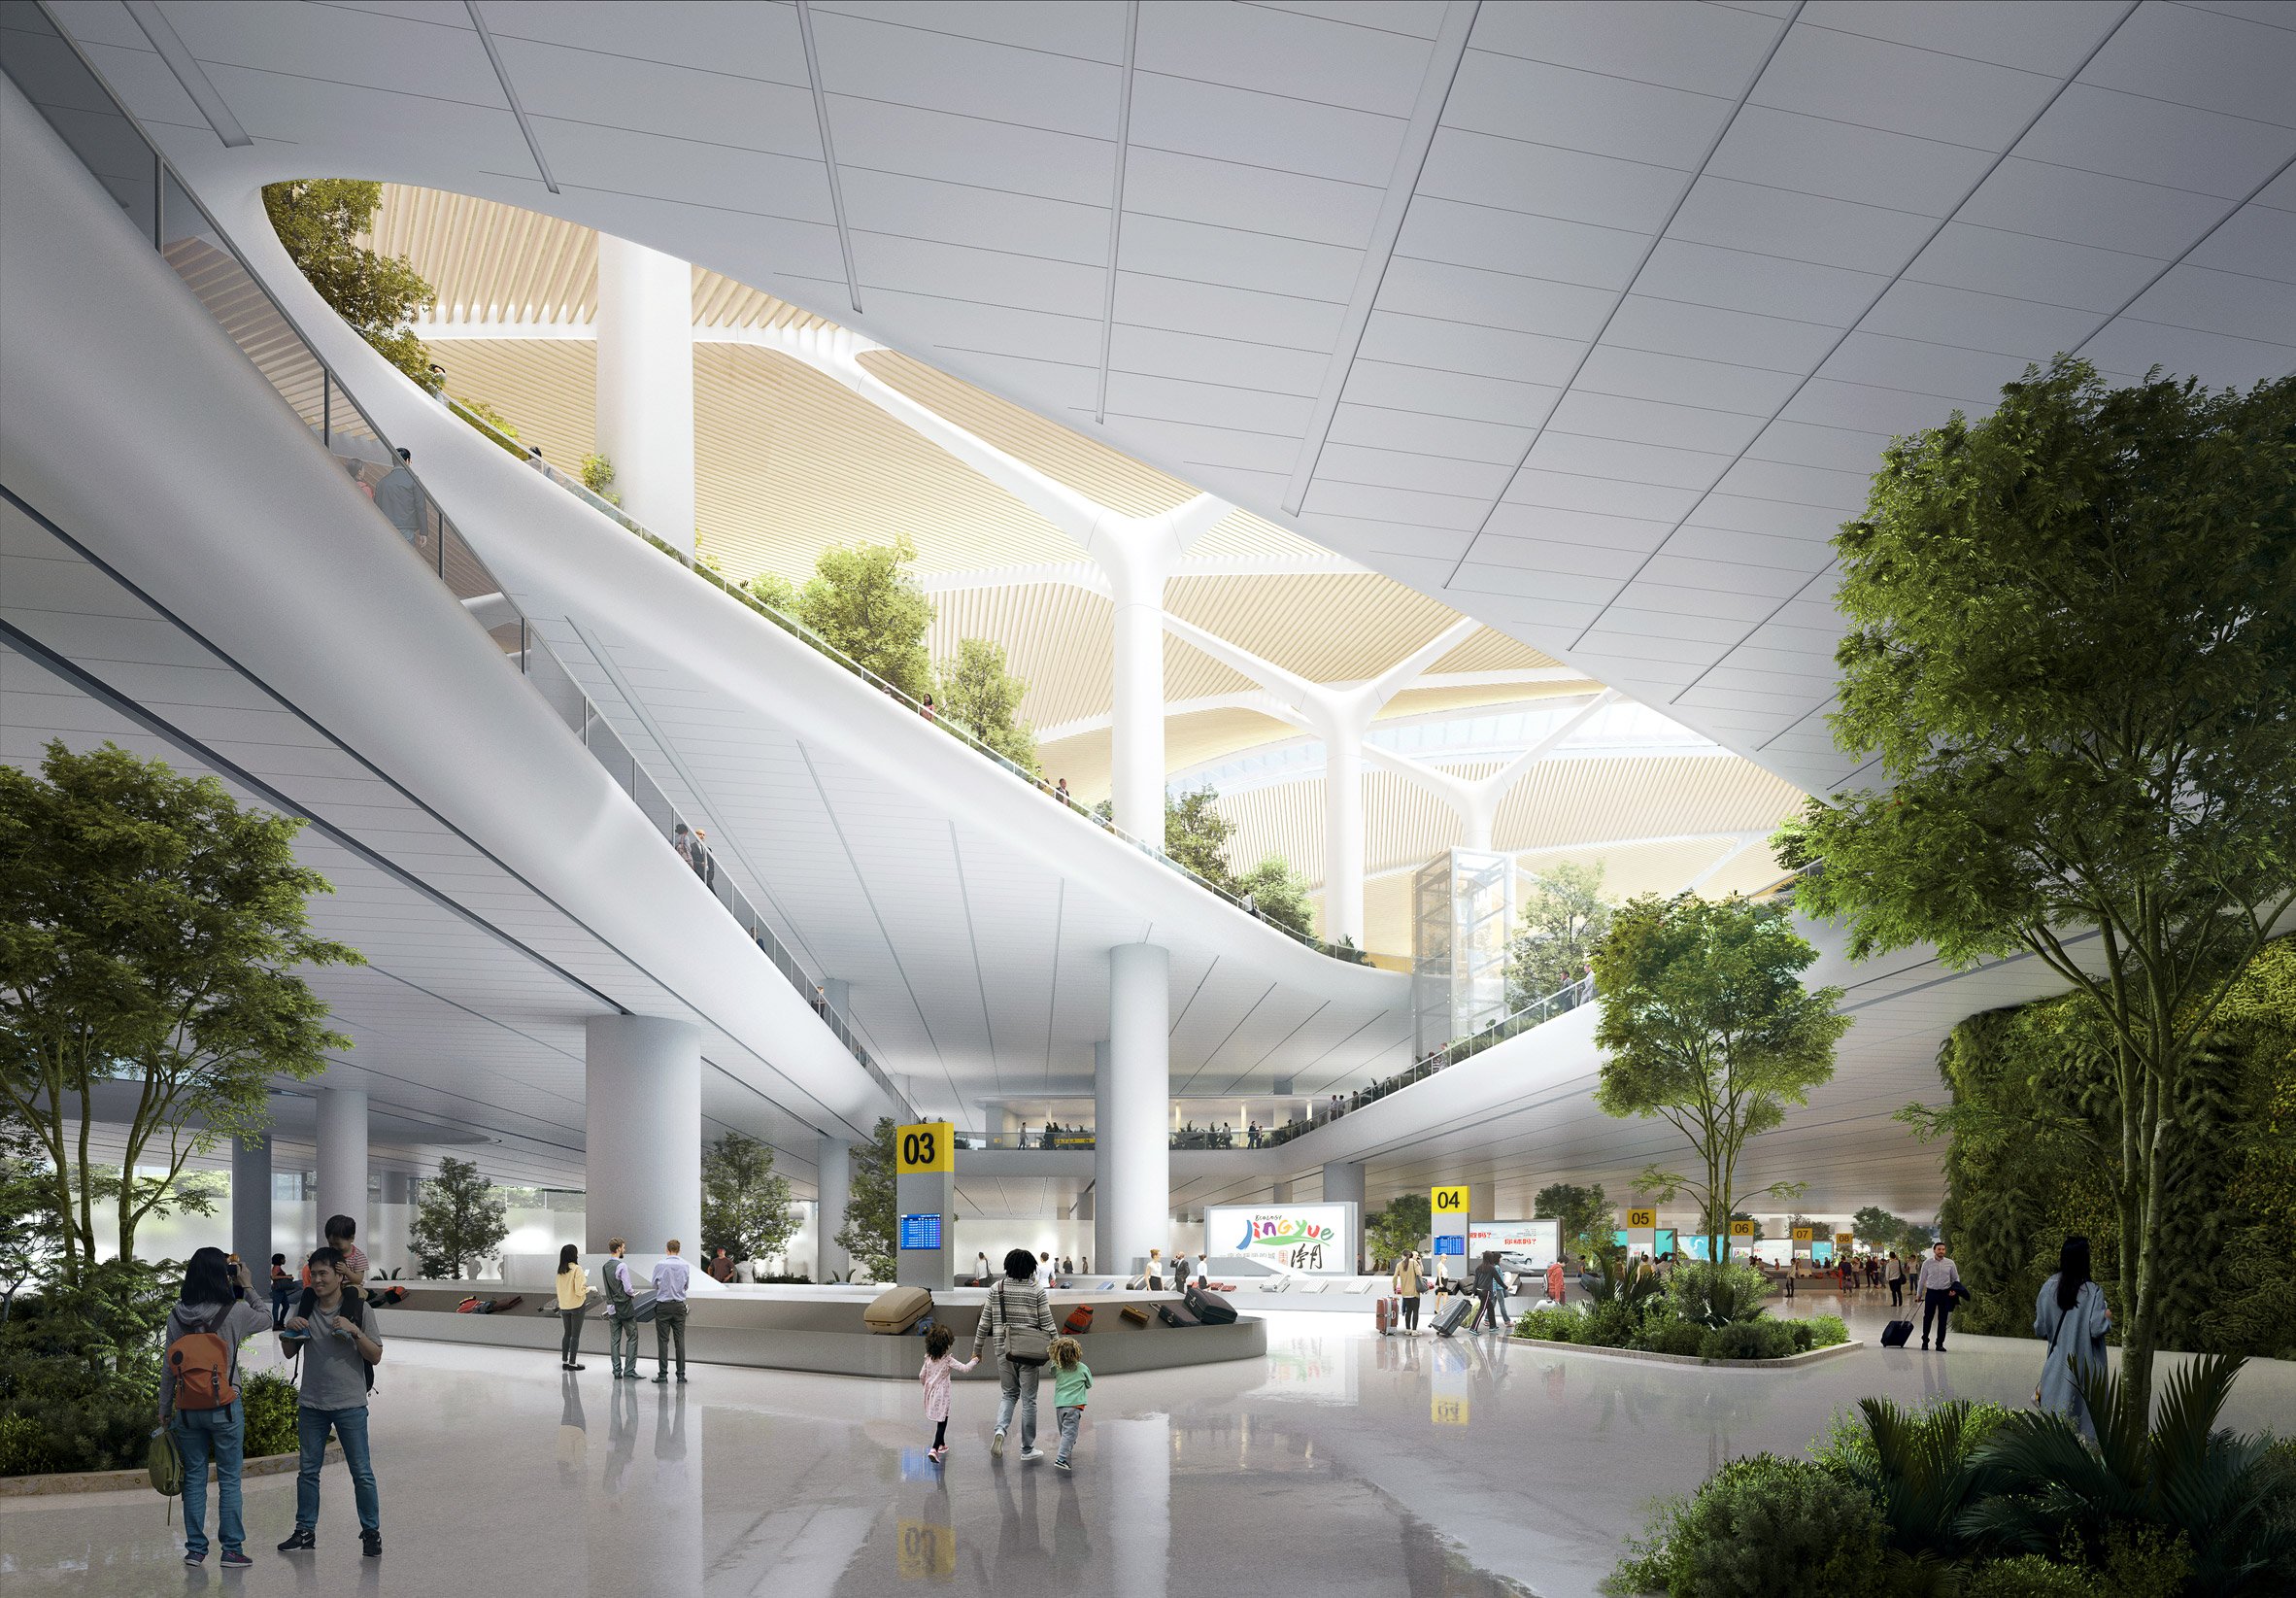 Proposed interior of Terminal 3 at China's Changchun Longjia International Airport by MAD